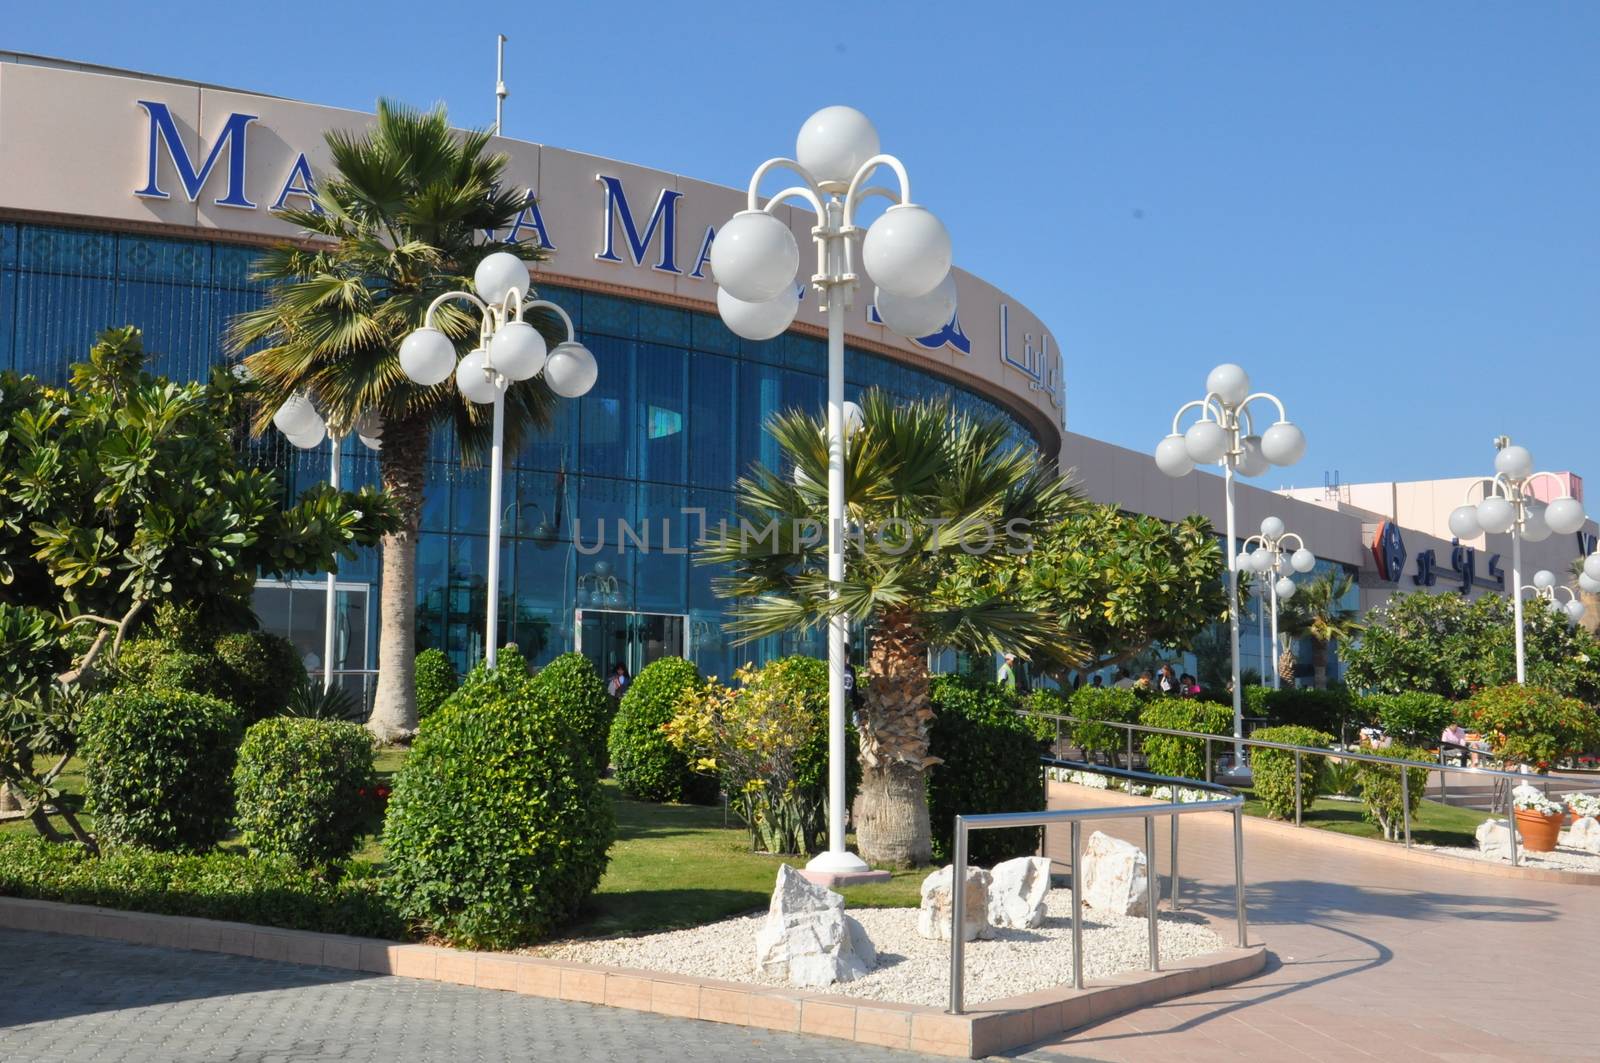 Marina Mall in Abu Dhabi, UAE. It is one of the largest malls in Abu Dhabi and features an observatory, ice rink, movie complex and bowling alley.